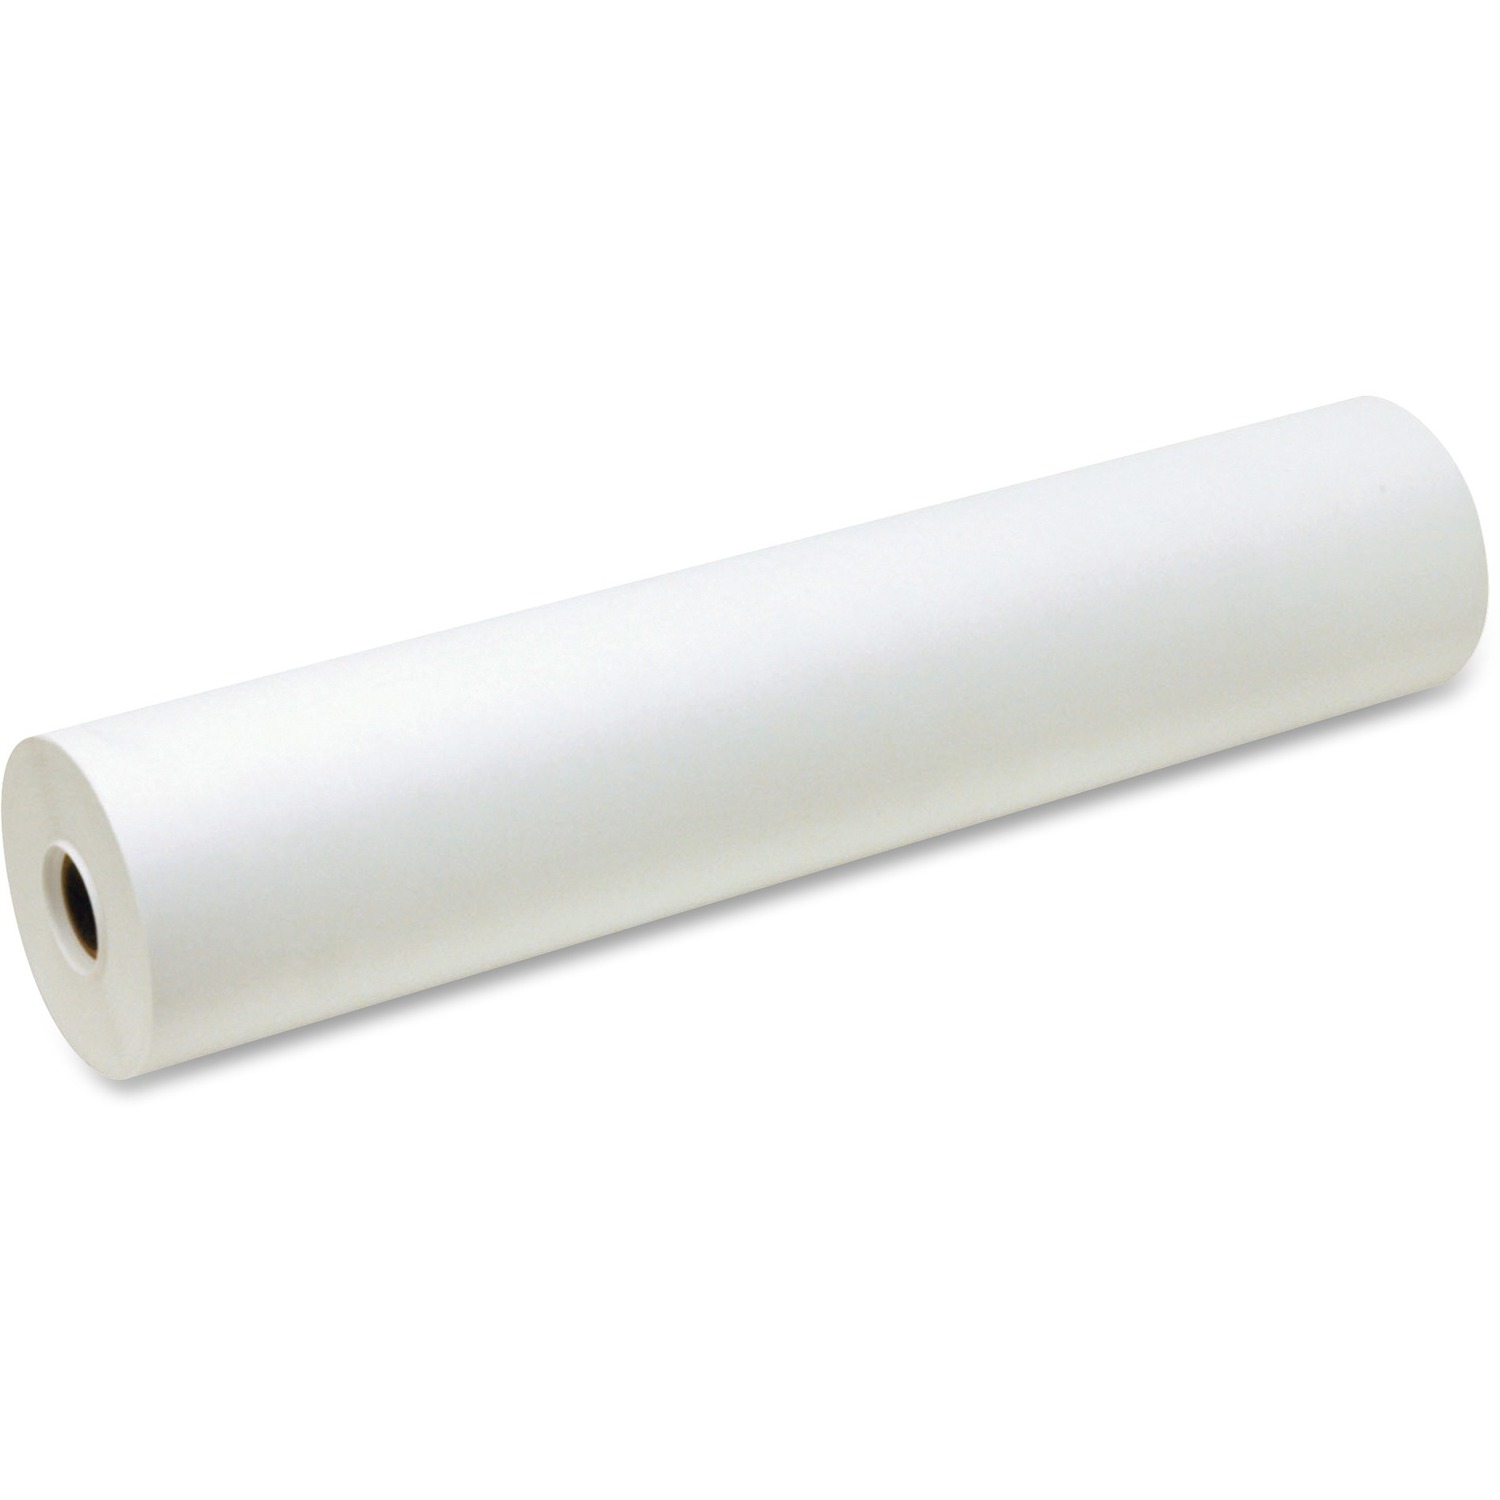 Pacon Easel Roll Drawing Paper 18" X 200', 50 Ib, White PAC4763